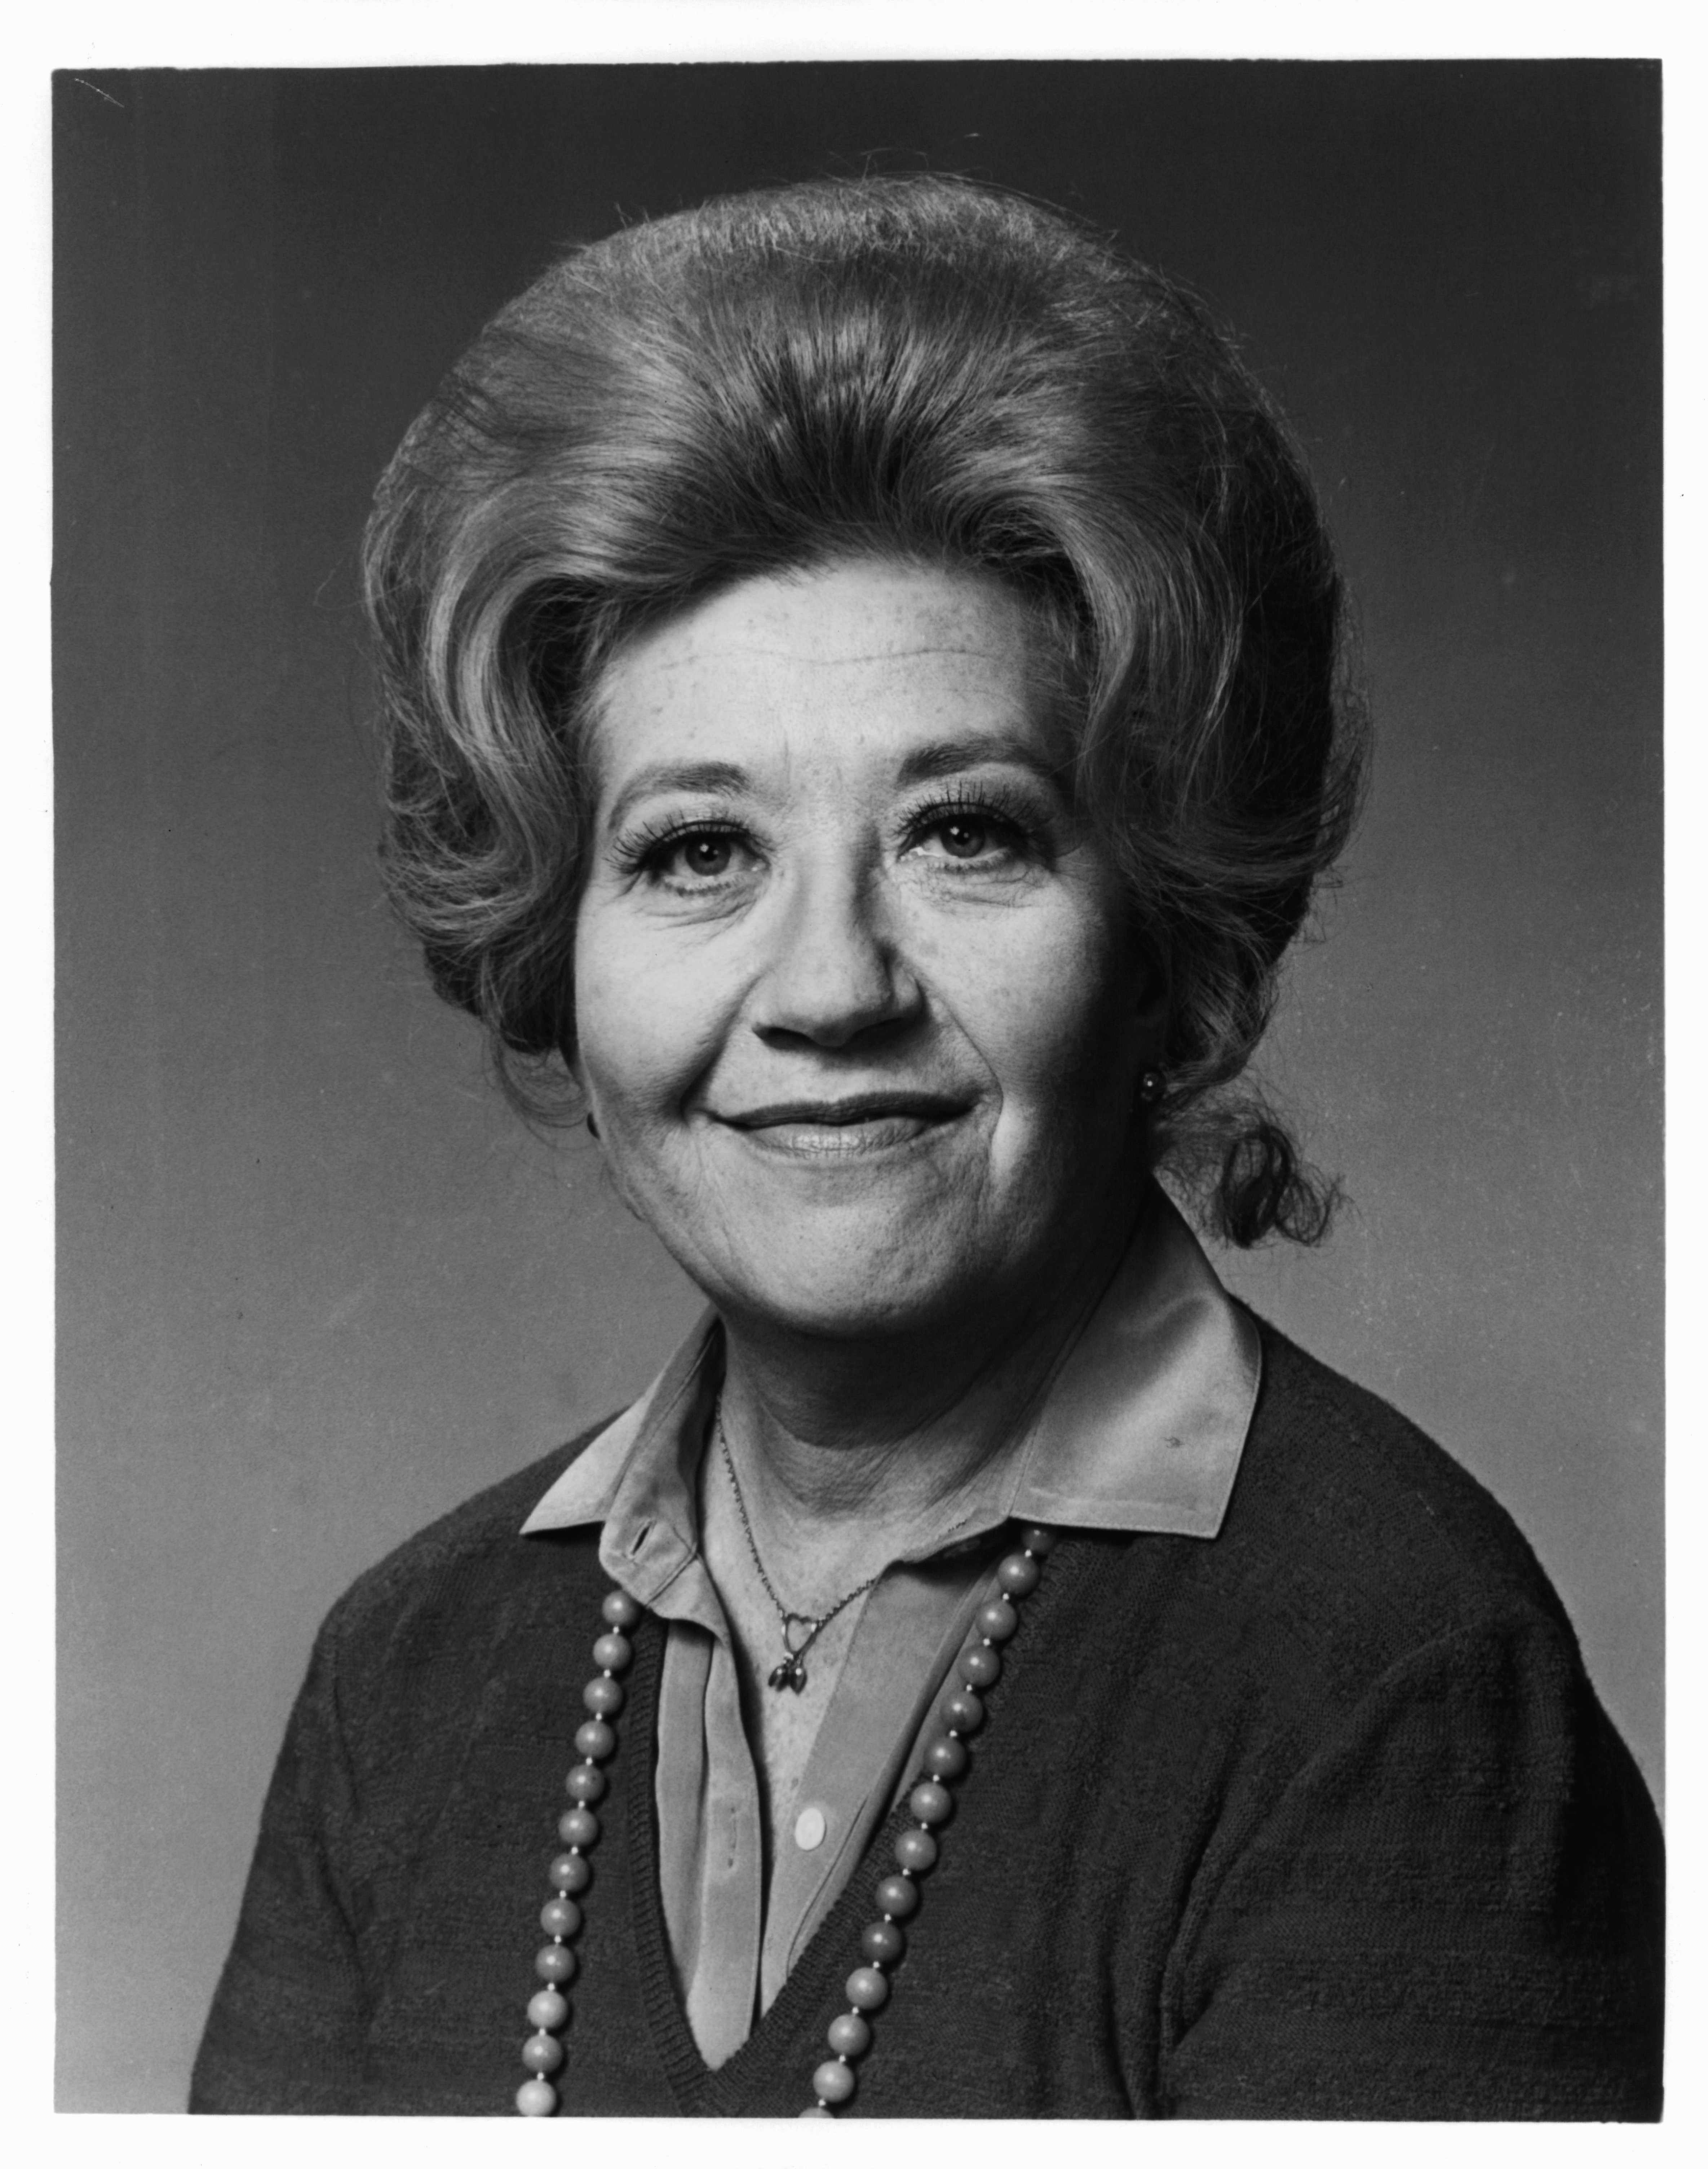 Charlotte Rae in a publicity portrait from the television series, "The Facts Of Life," circa 1980 | Source: Getty Images